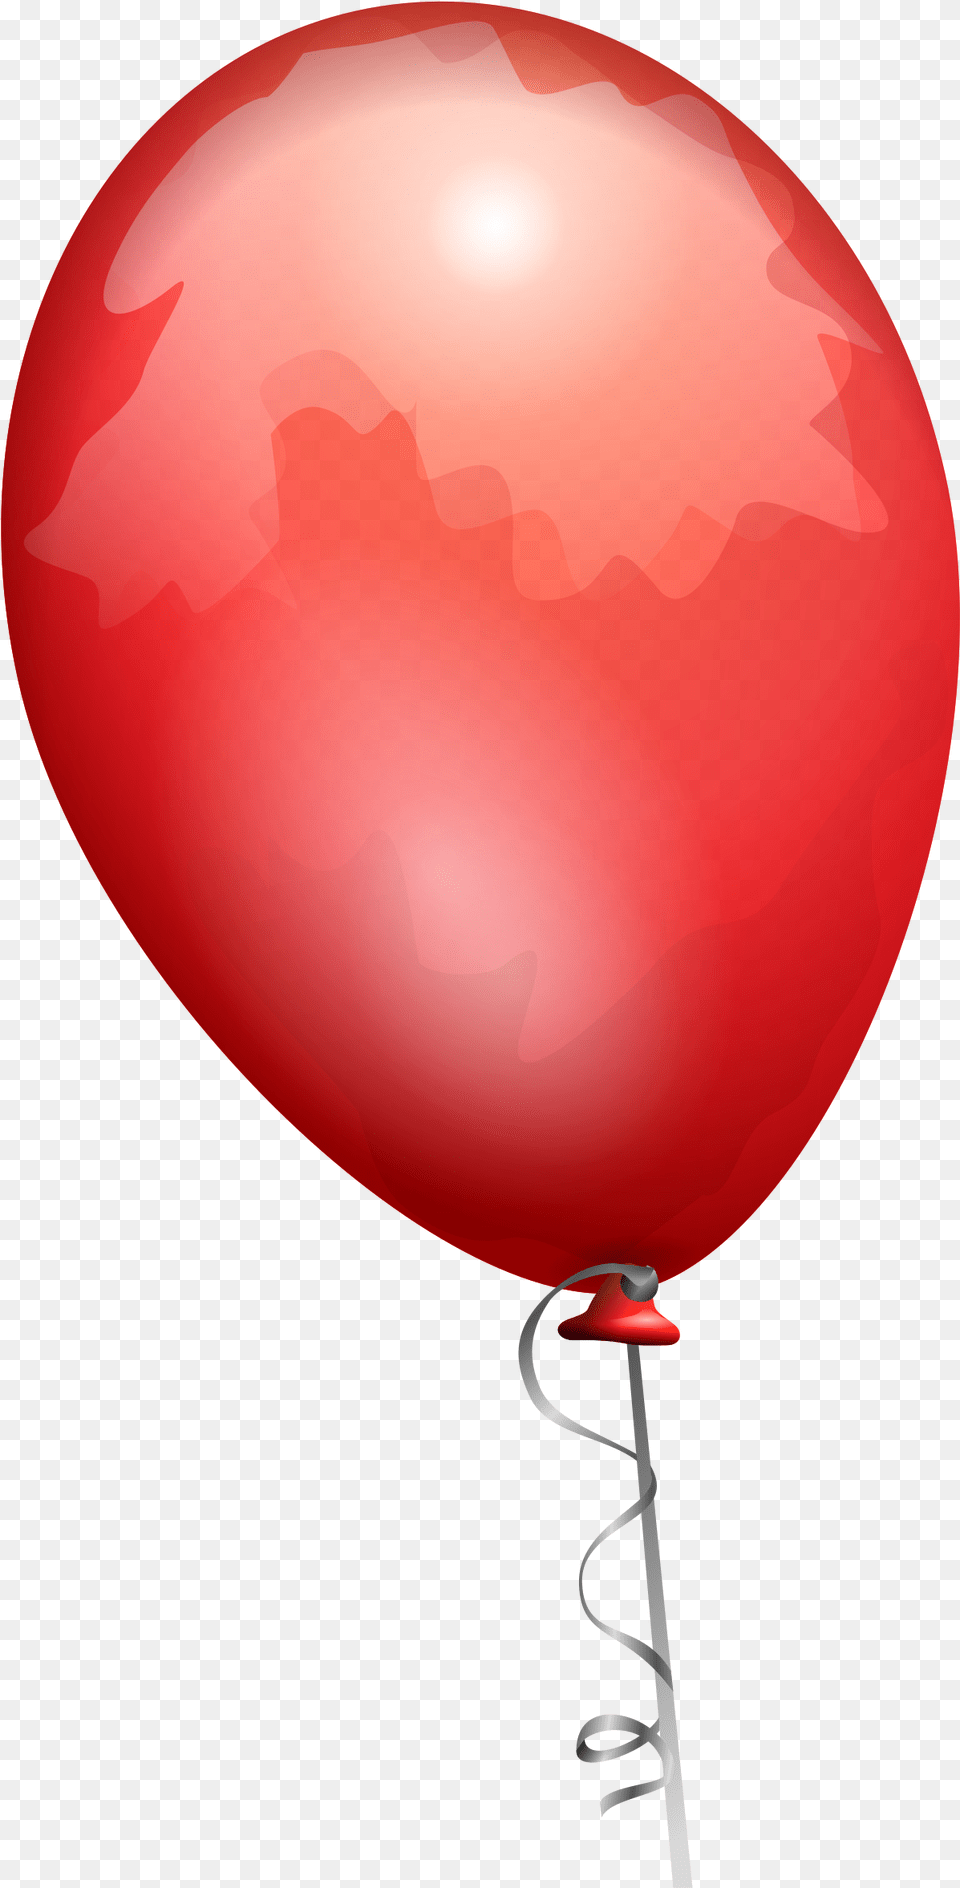 Red Balloon With Stick Balloon Clip Art Free Transparent Png